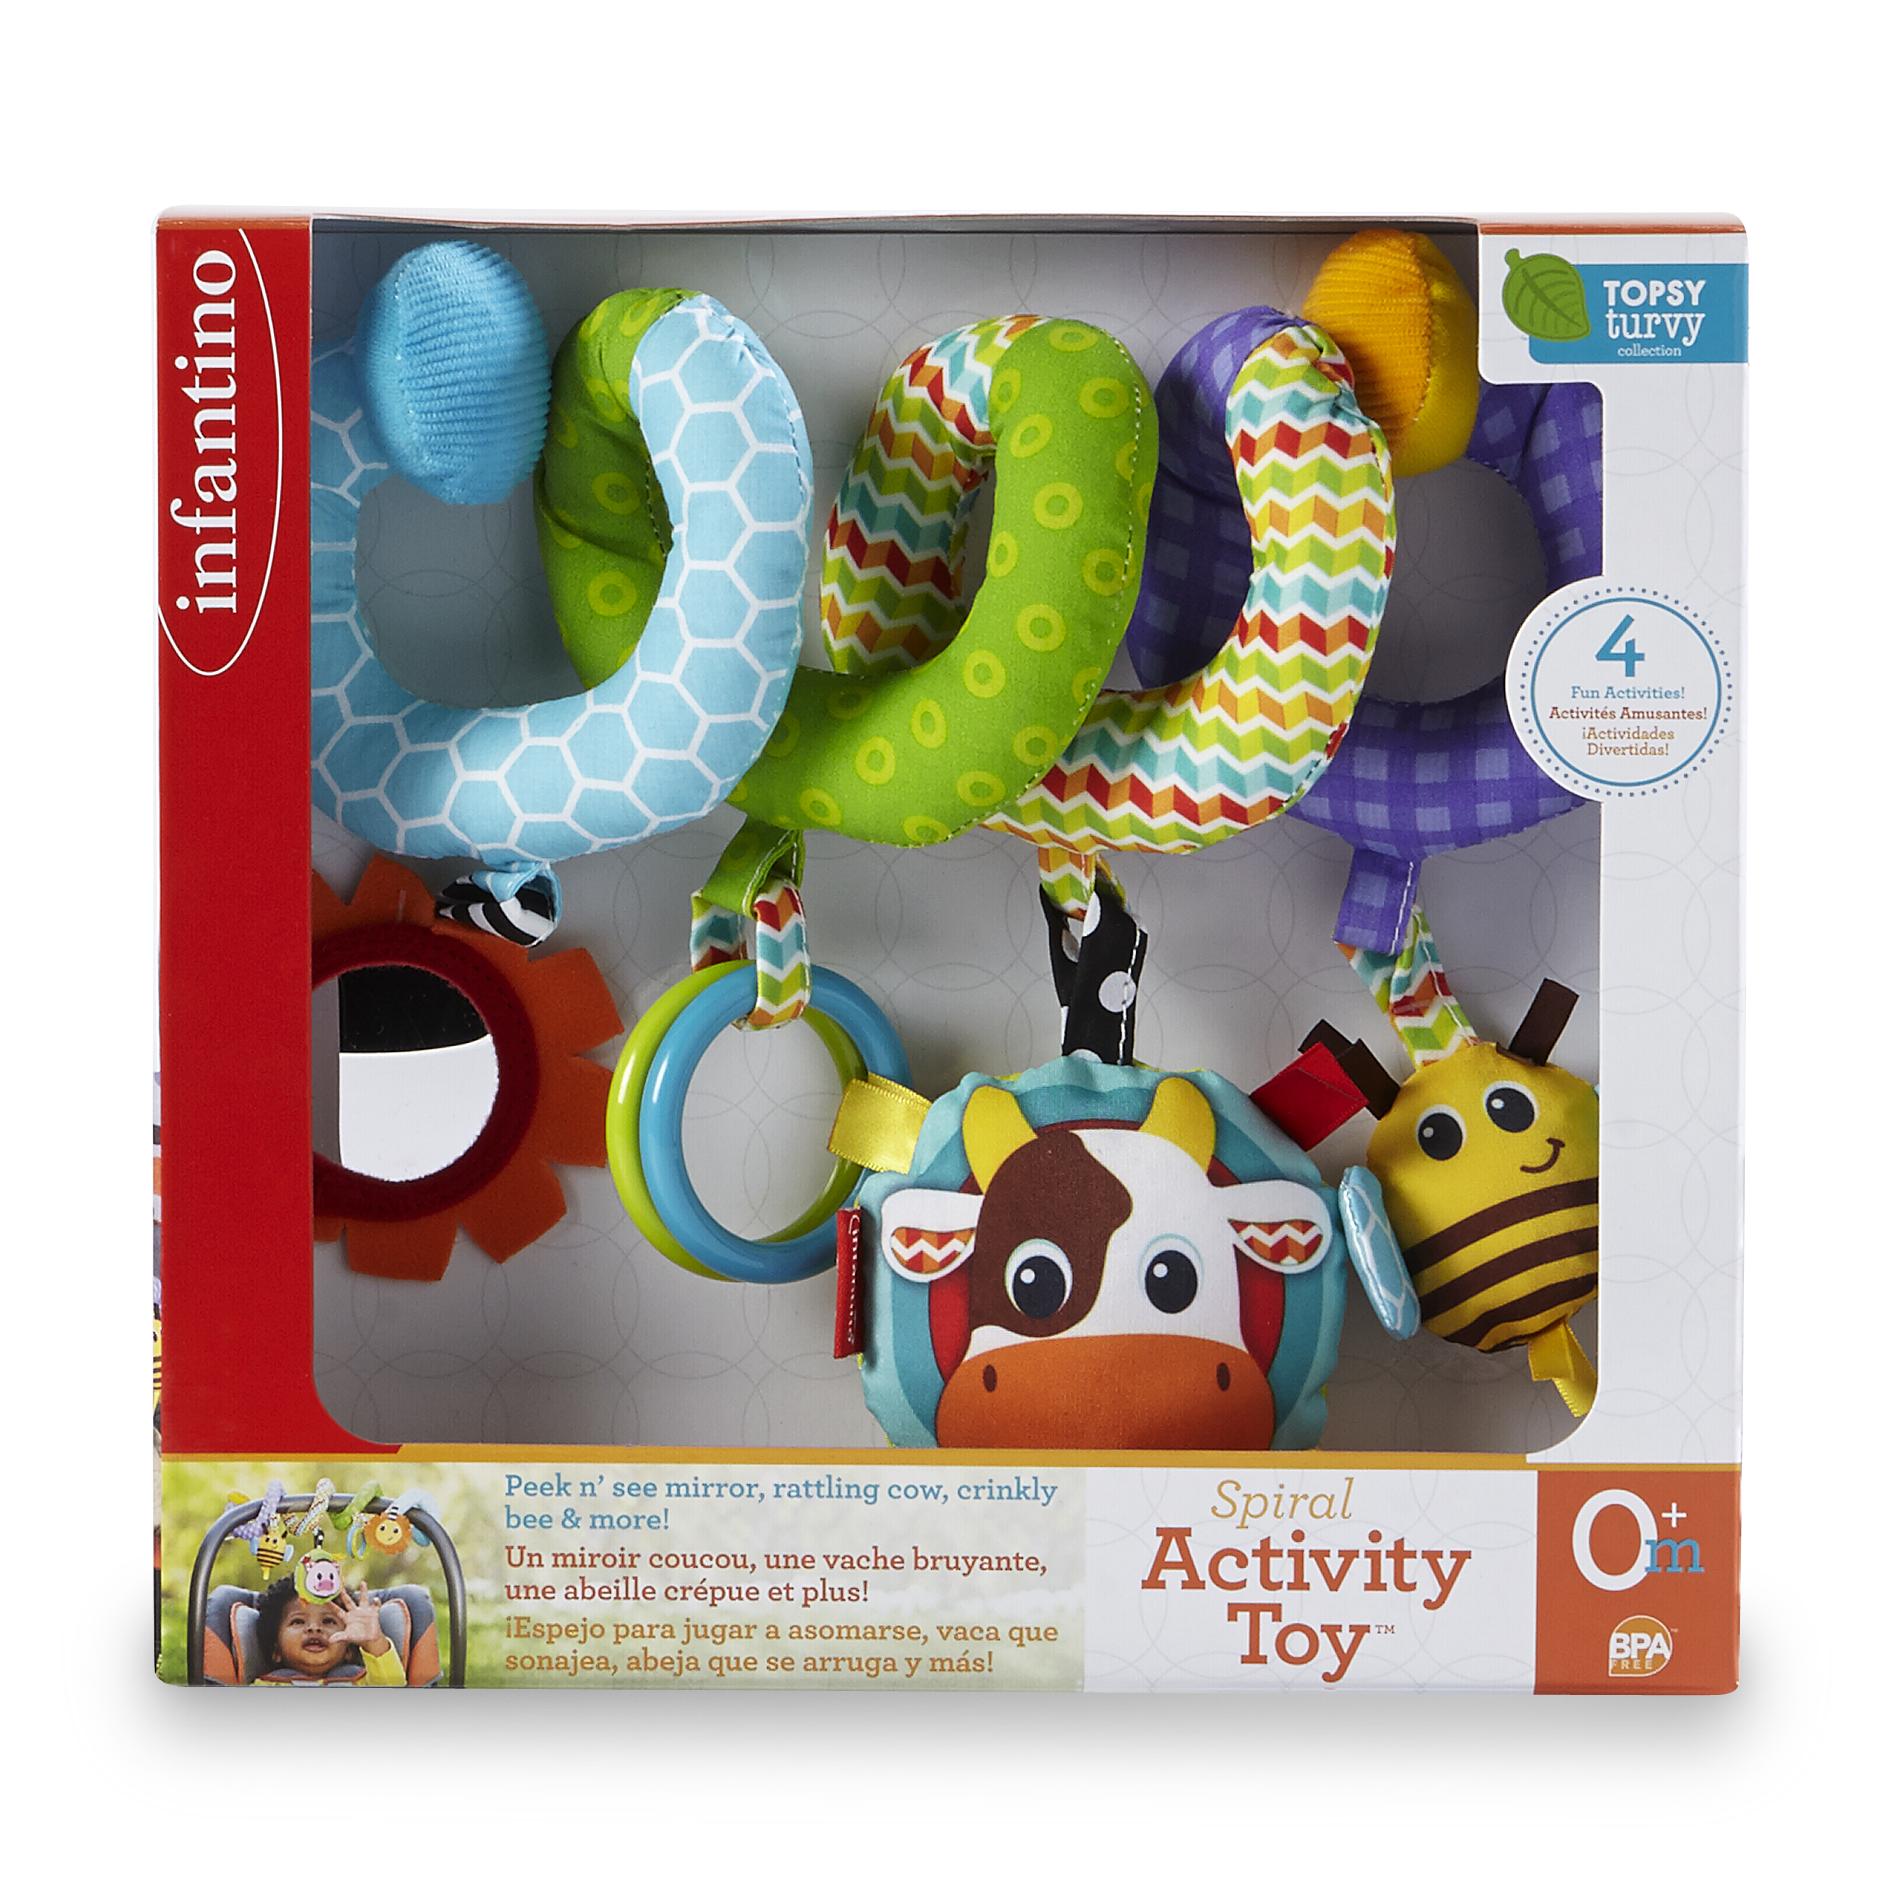 Infantino Infant Boy's Topsy Turvy Collection Spiral Activity Toy